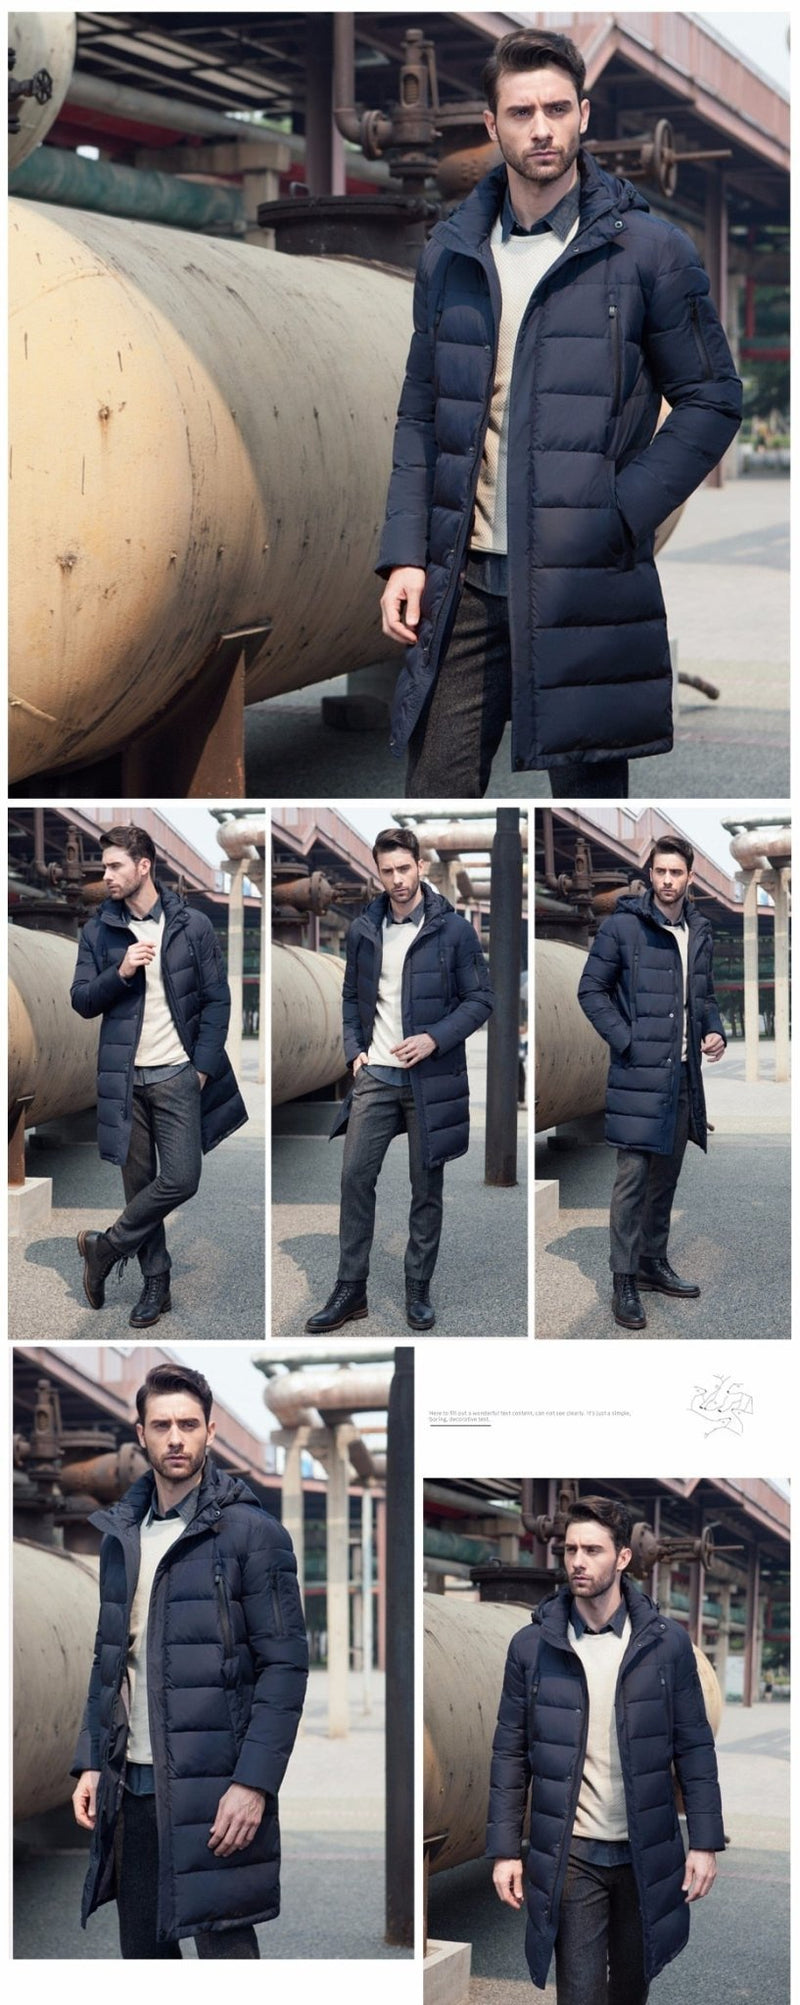 ICEbear 2019 New Clothing Jackets Business Long Thick Winter Coat Men Solid Parka Fashion Overcoat Outerwear 16M298D - Starttech Online Market